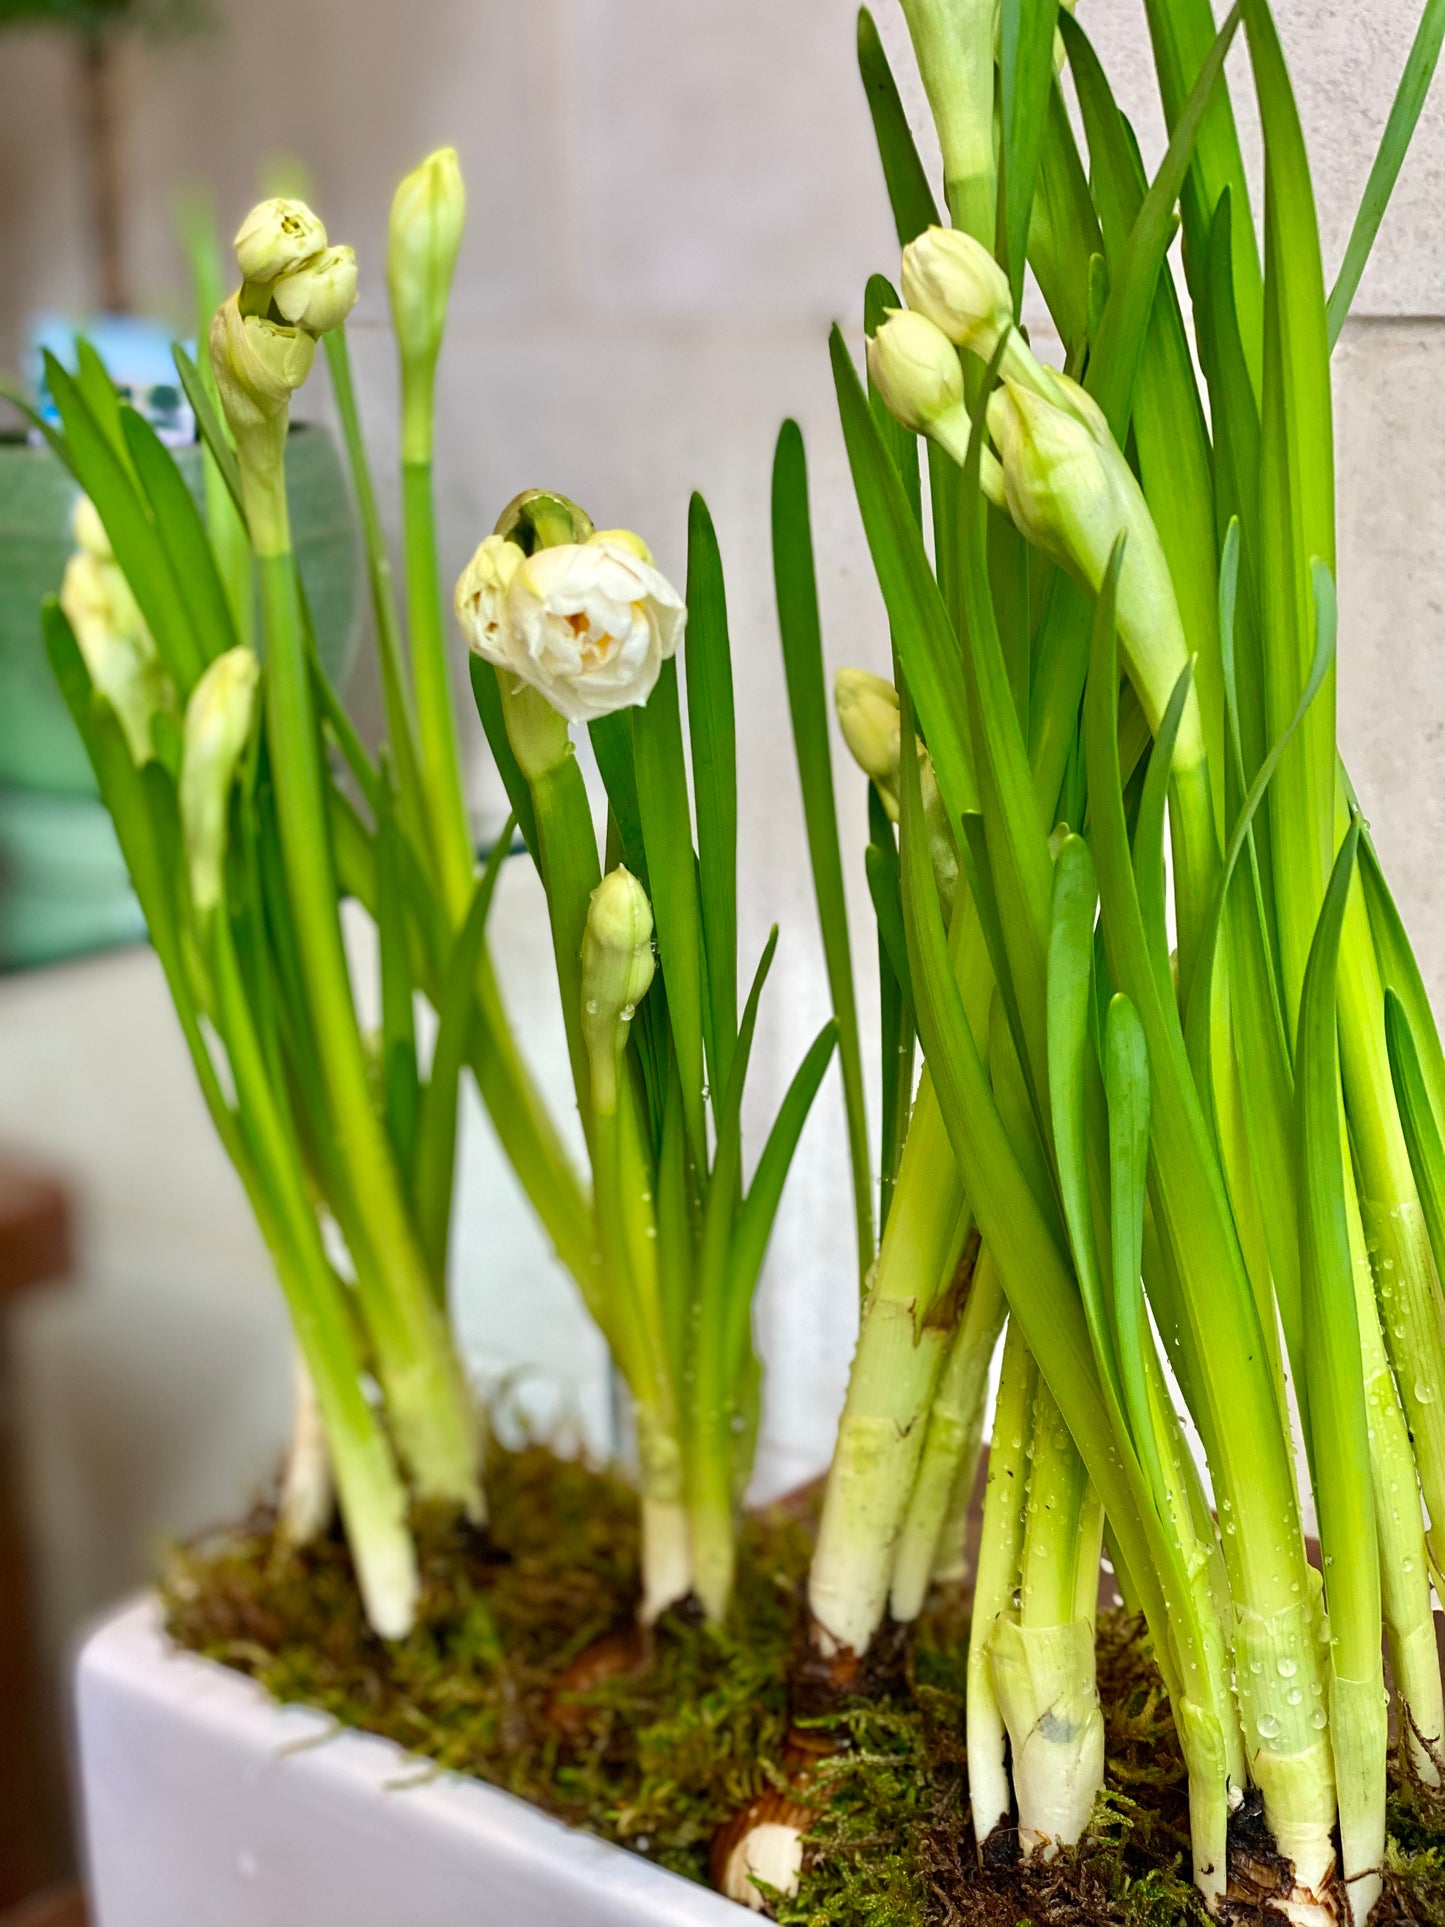 Potted Bridal-crown Daffodils